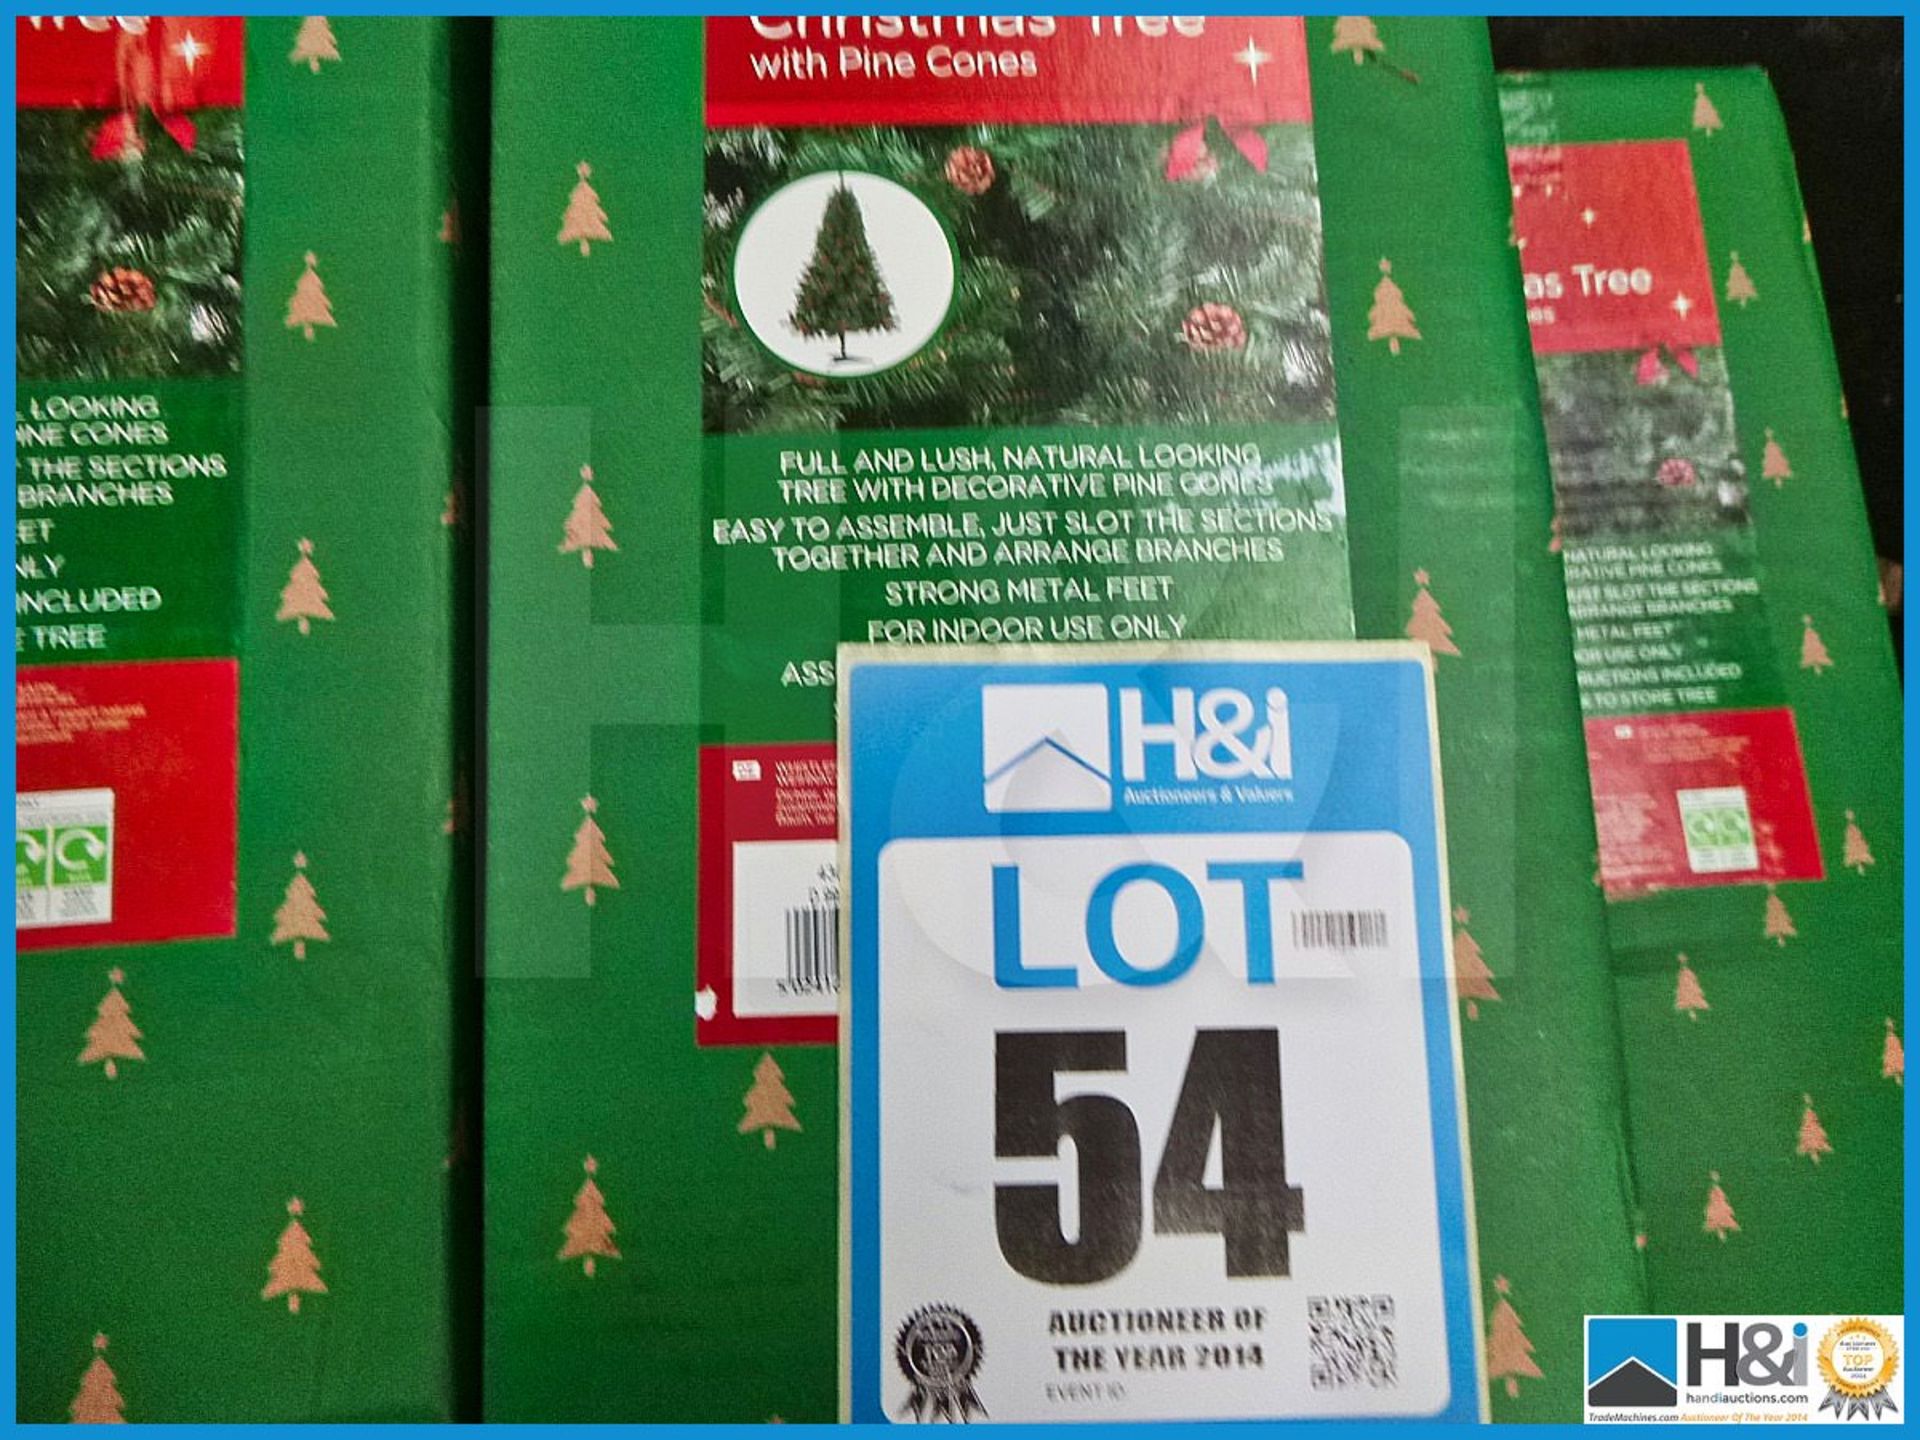 GARDMAN ARTIFICIAL 6' WHISTLER FROSTED CHRISTMAS TREE WITH CONES, 43029XS, RRP £85.99, FULL AND LUSH